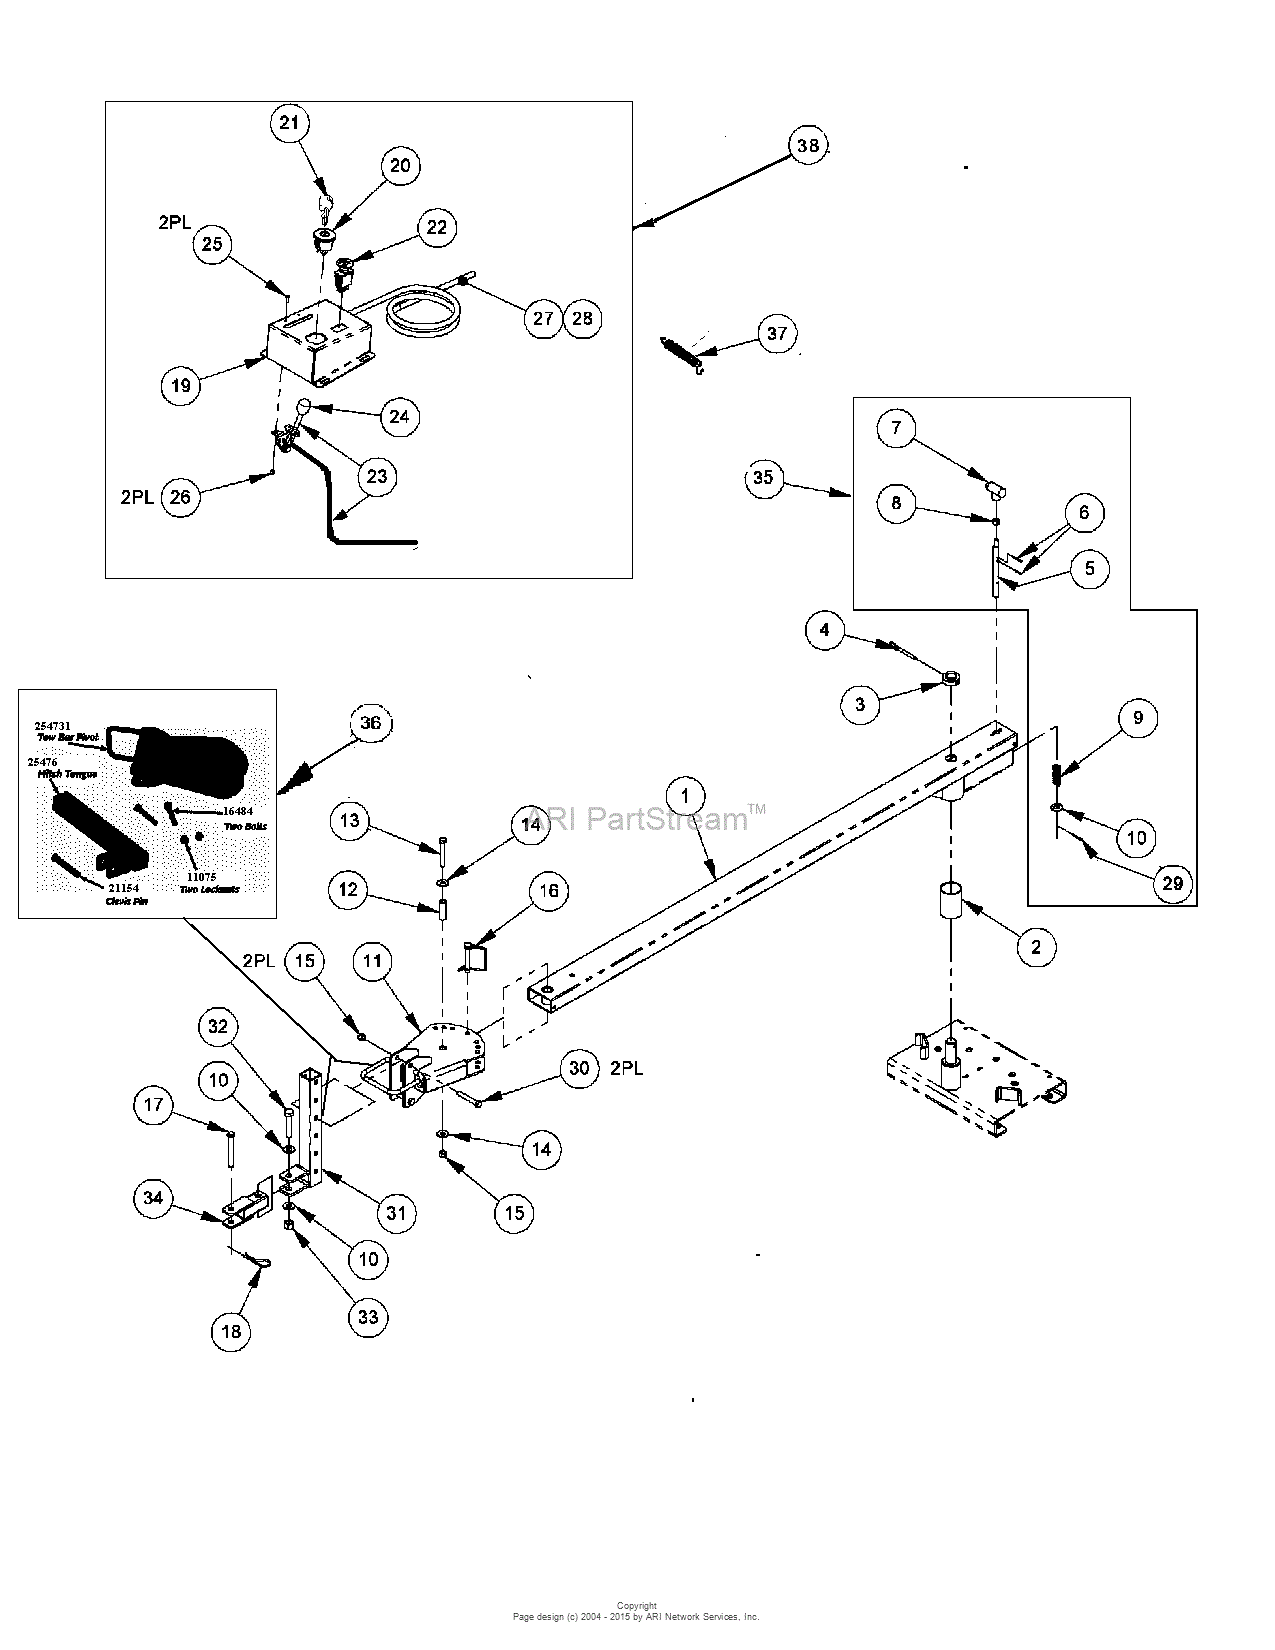 Dr Power Tb1 Tow Behind Mower Ser Tbm000001 To Tbm011881 Parts Diagram For Tow Bar Remote Control Panel Assembly